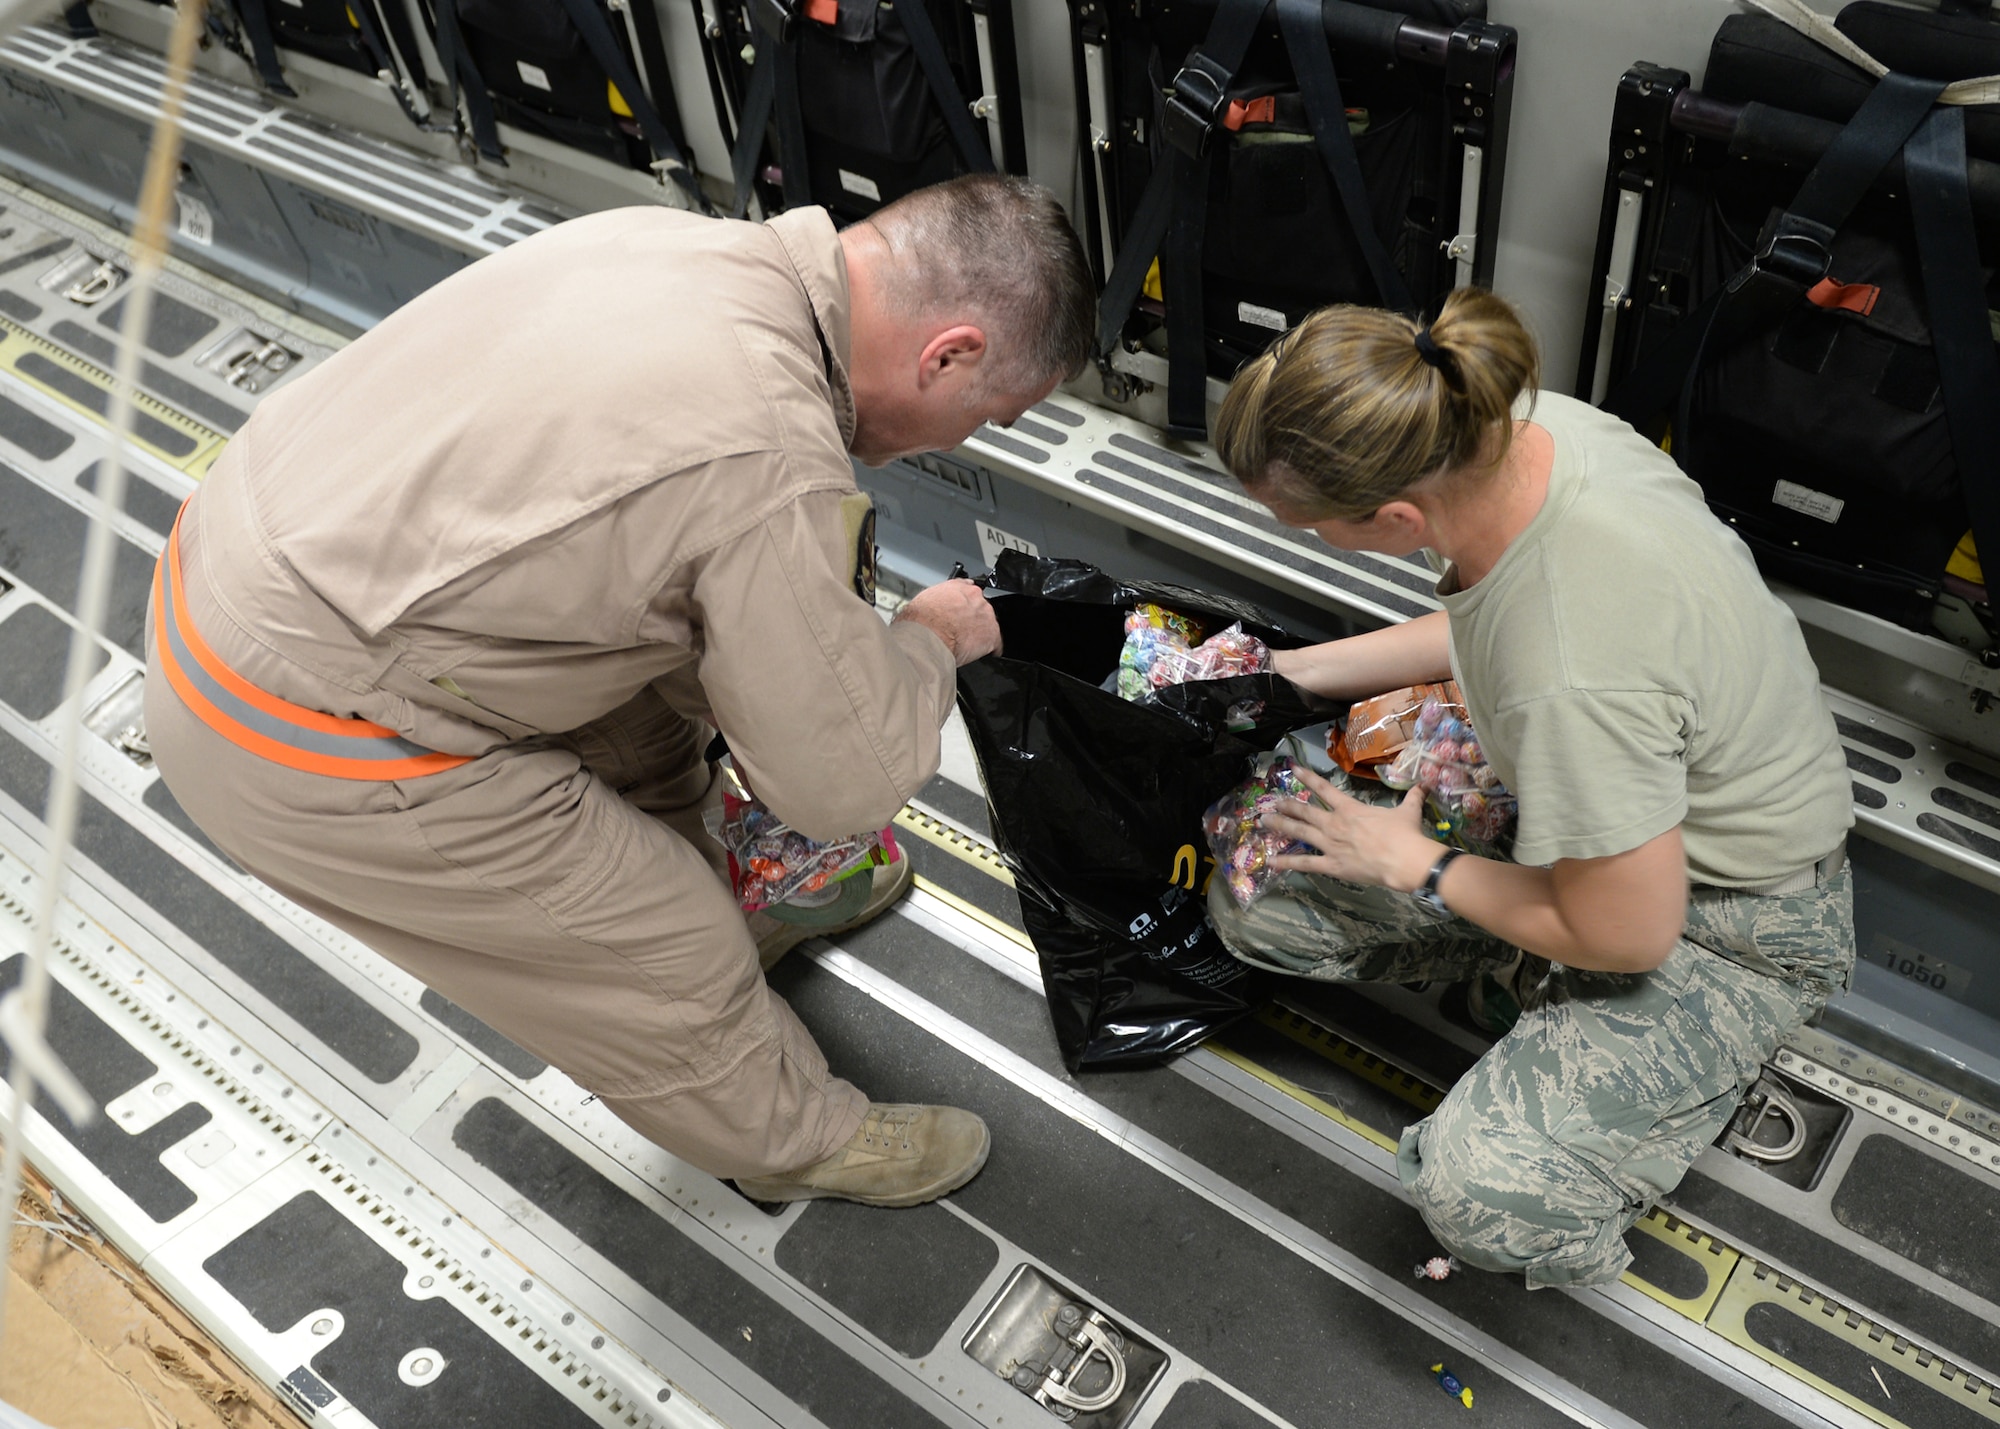 Master Sgts. Stephen Brown (left) and Emily Edmunds, 816th Expeditionary Airlift Squadron loadmasters, sort candy to attach to container delivery system bundles filled with fresh drinking water on a C-17 Globemaster III in preparation for a humanitarian airdrop  Aug. 30, 2014, over the area if Amirli, Iraq. The candy was collected by the squadron to supplement United States government humanitarian aid. (U.S. Air Force photo/Staff Sgt. Shawn Nickel)